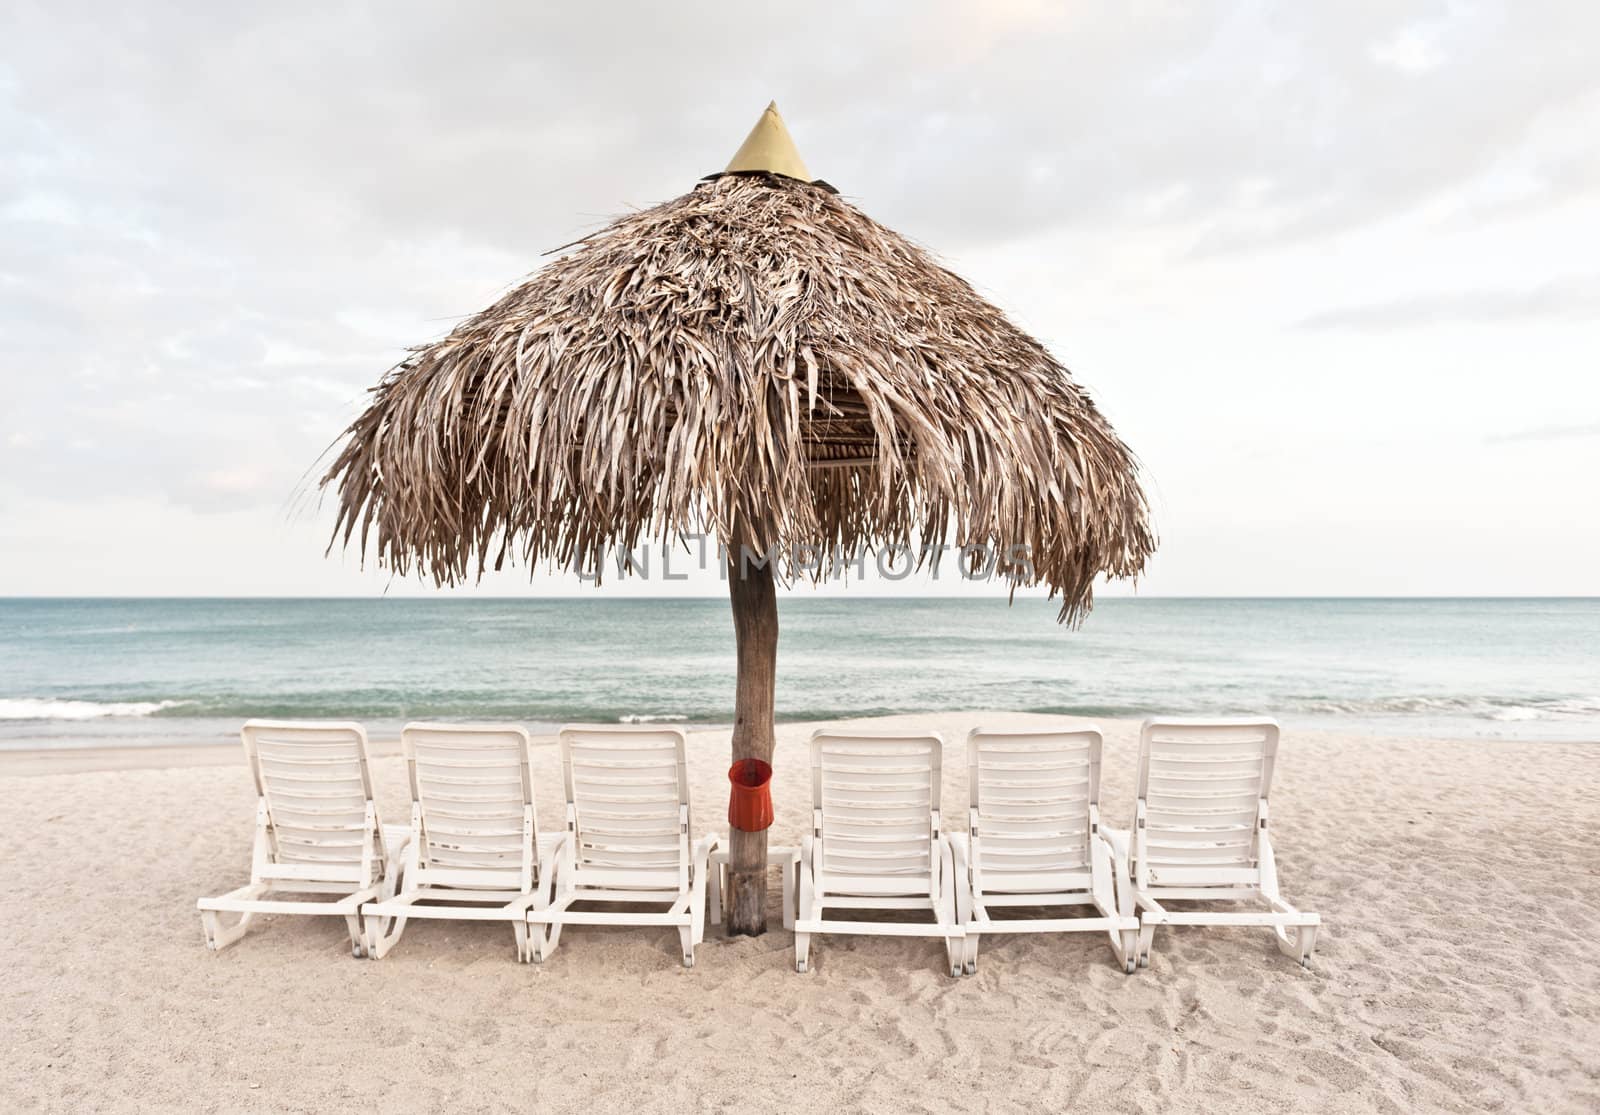 Sandy beach, umbrella and chairs by Marcus